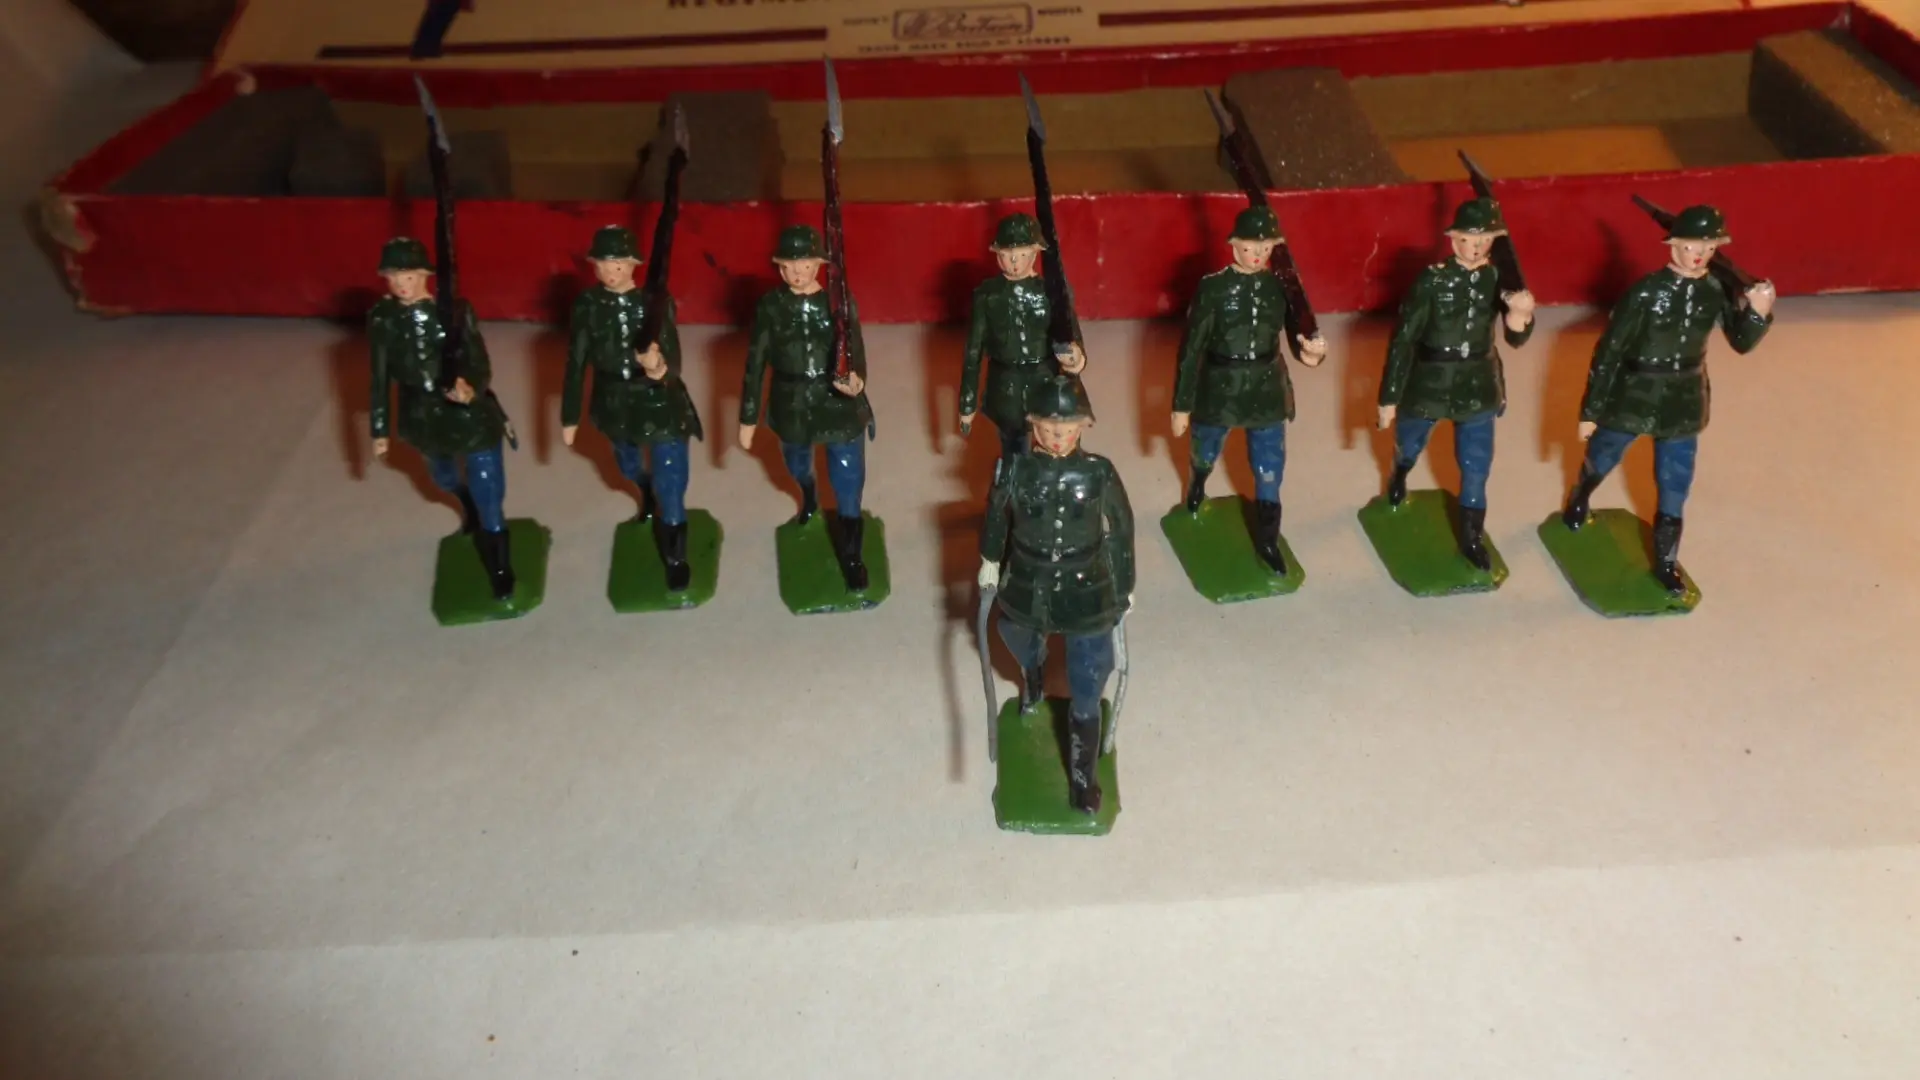 Soldier action figures